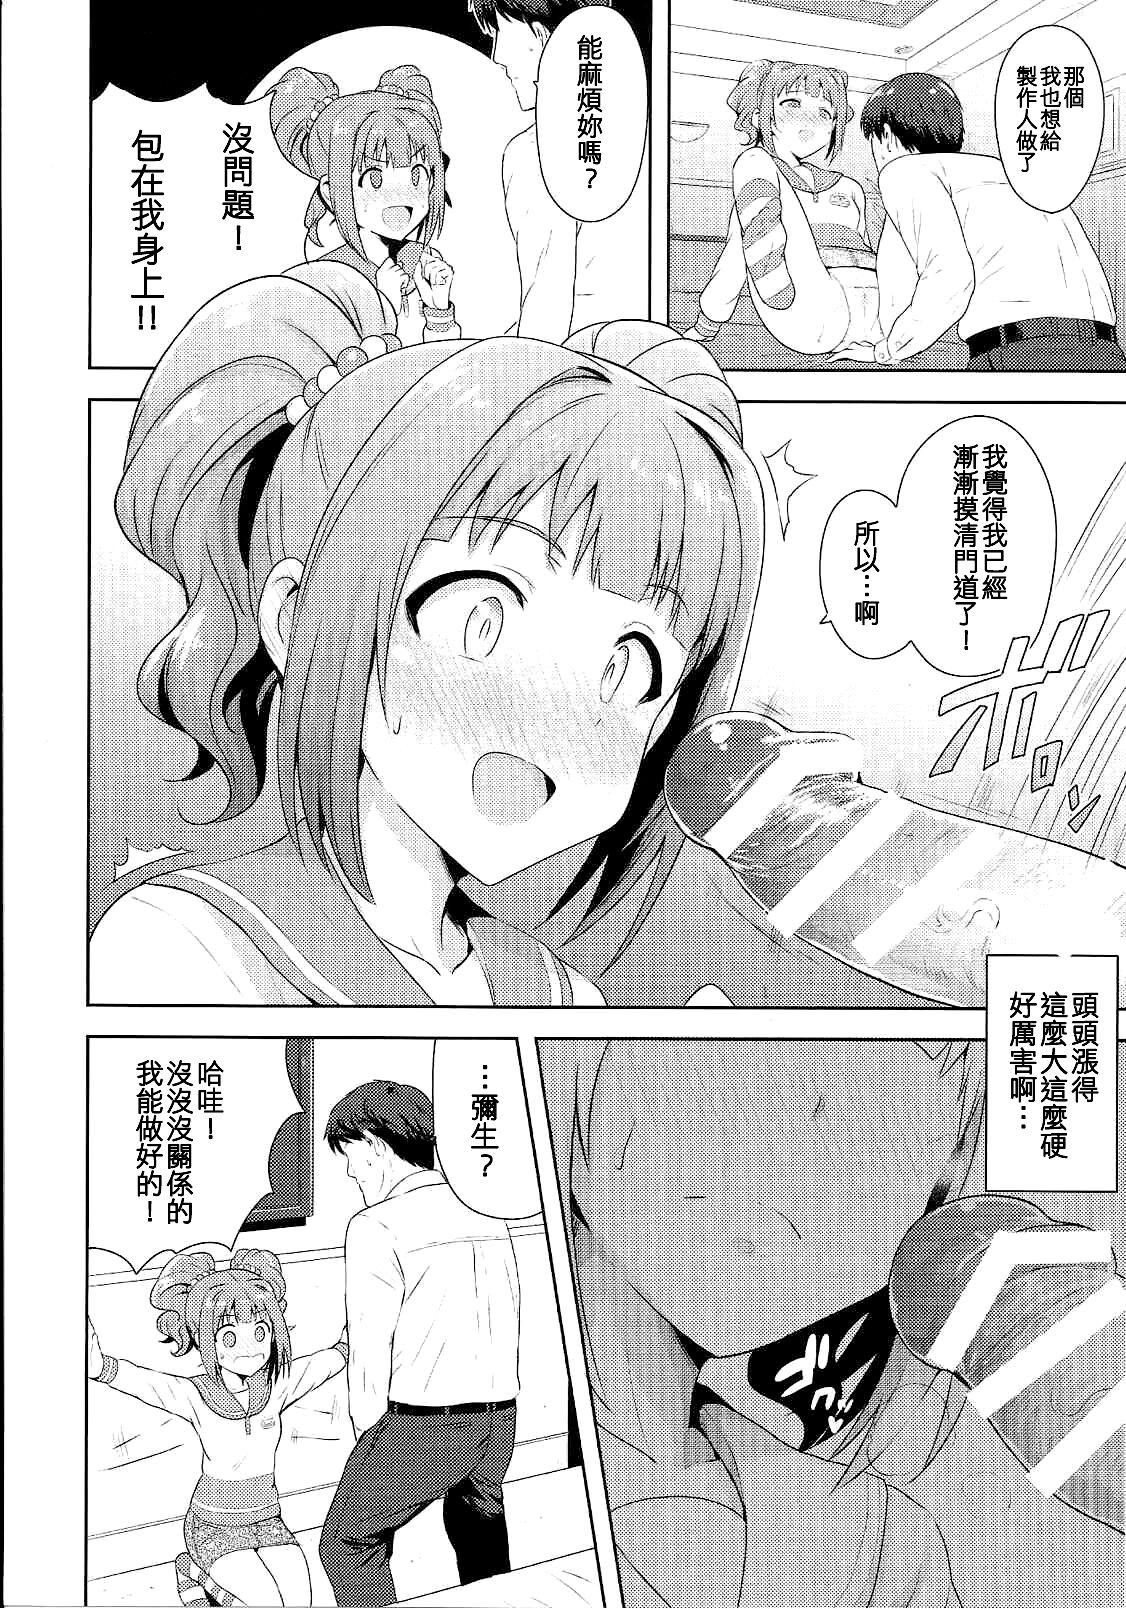 Mallu Yayoi to Issho 2 - The idolmaster Wet Cunt - Page 12